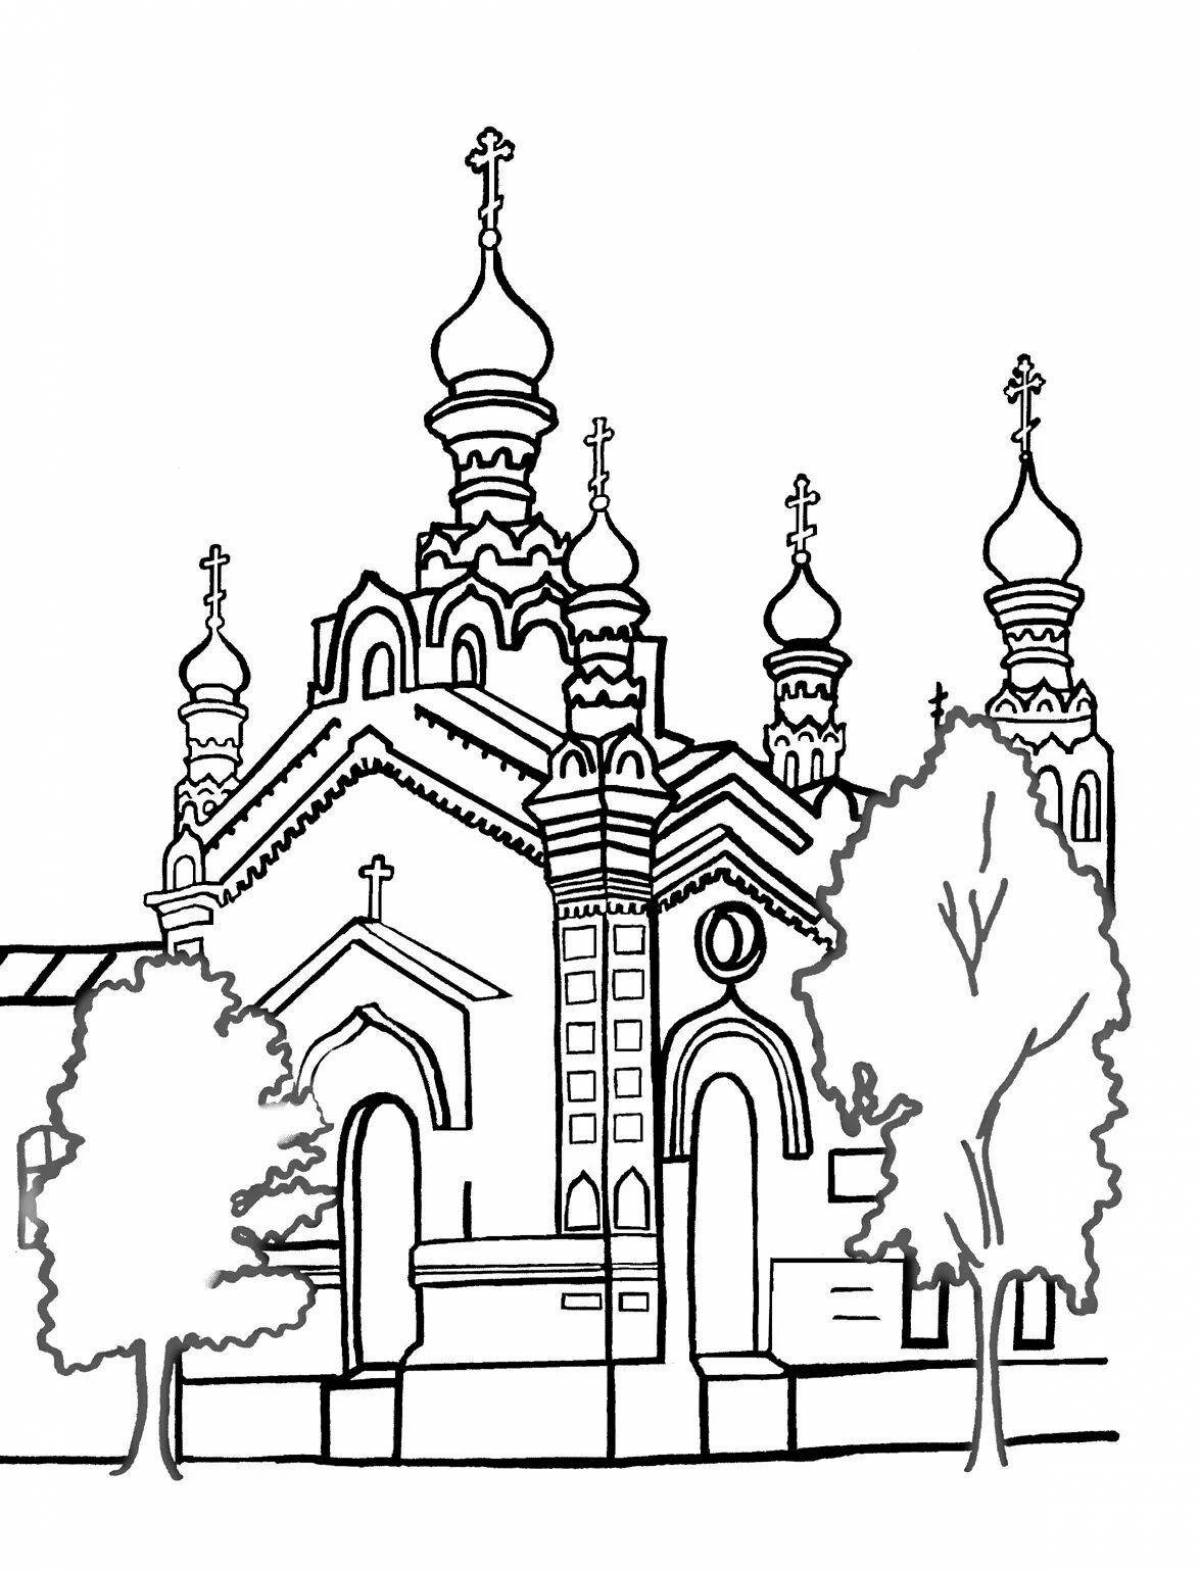 Colorful orthodox church coloring book for kids